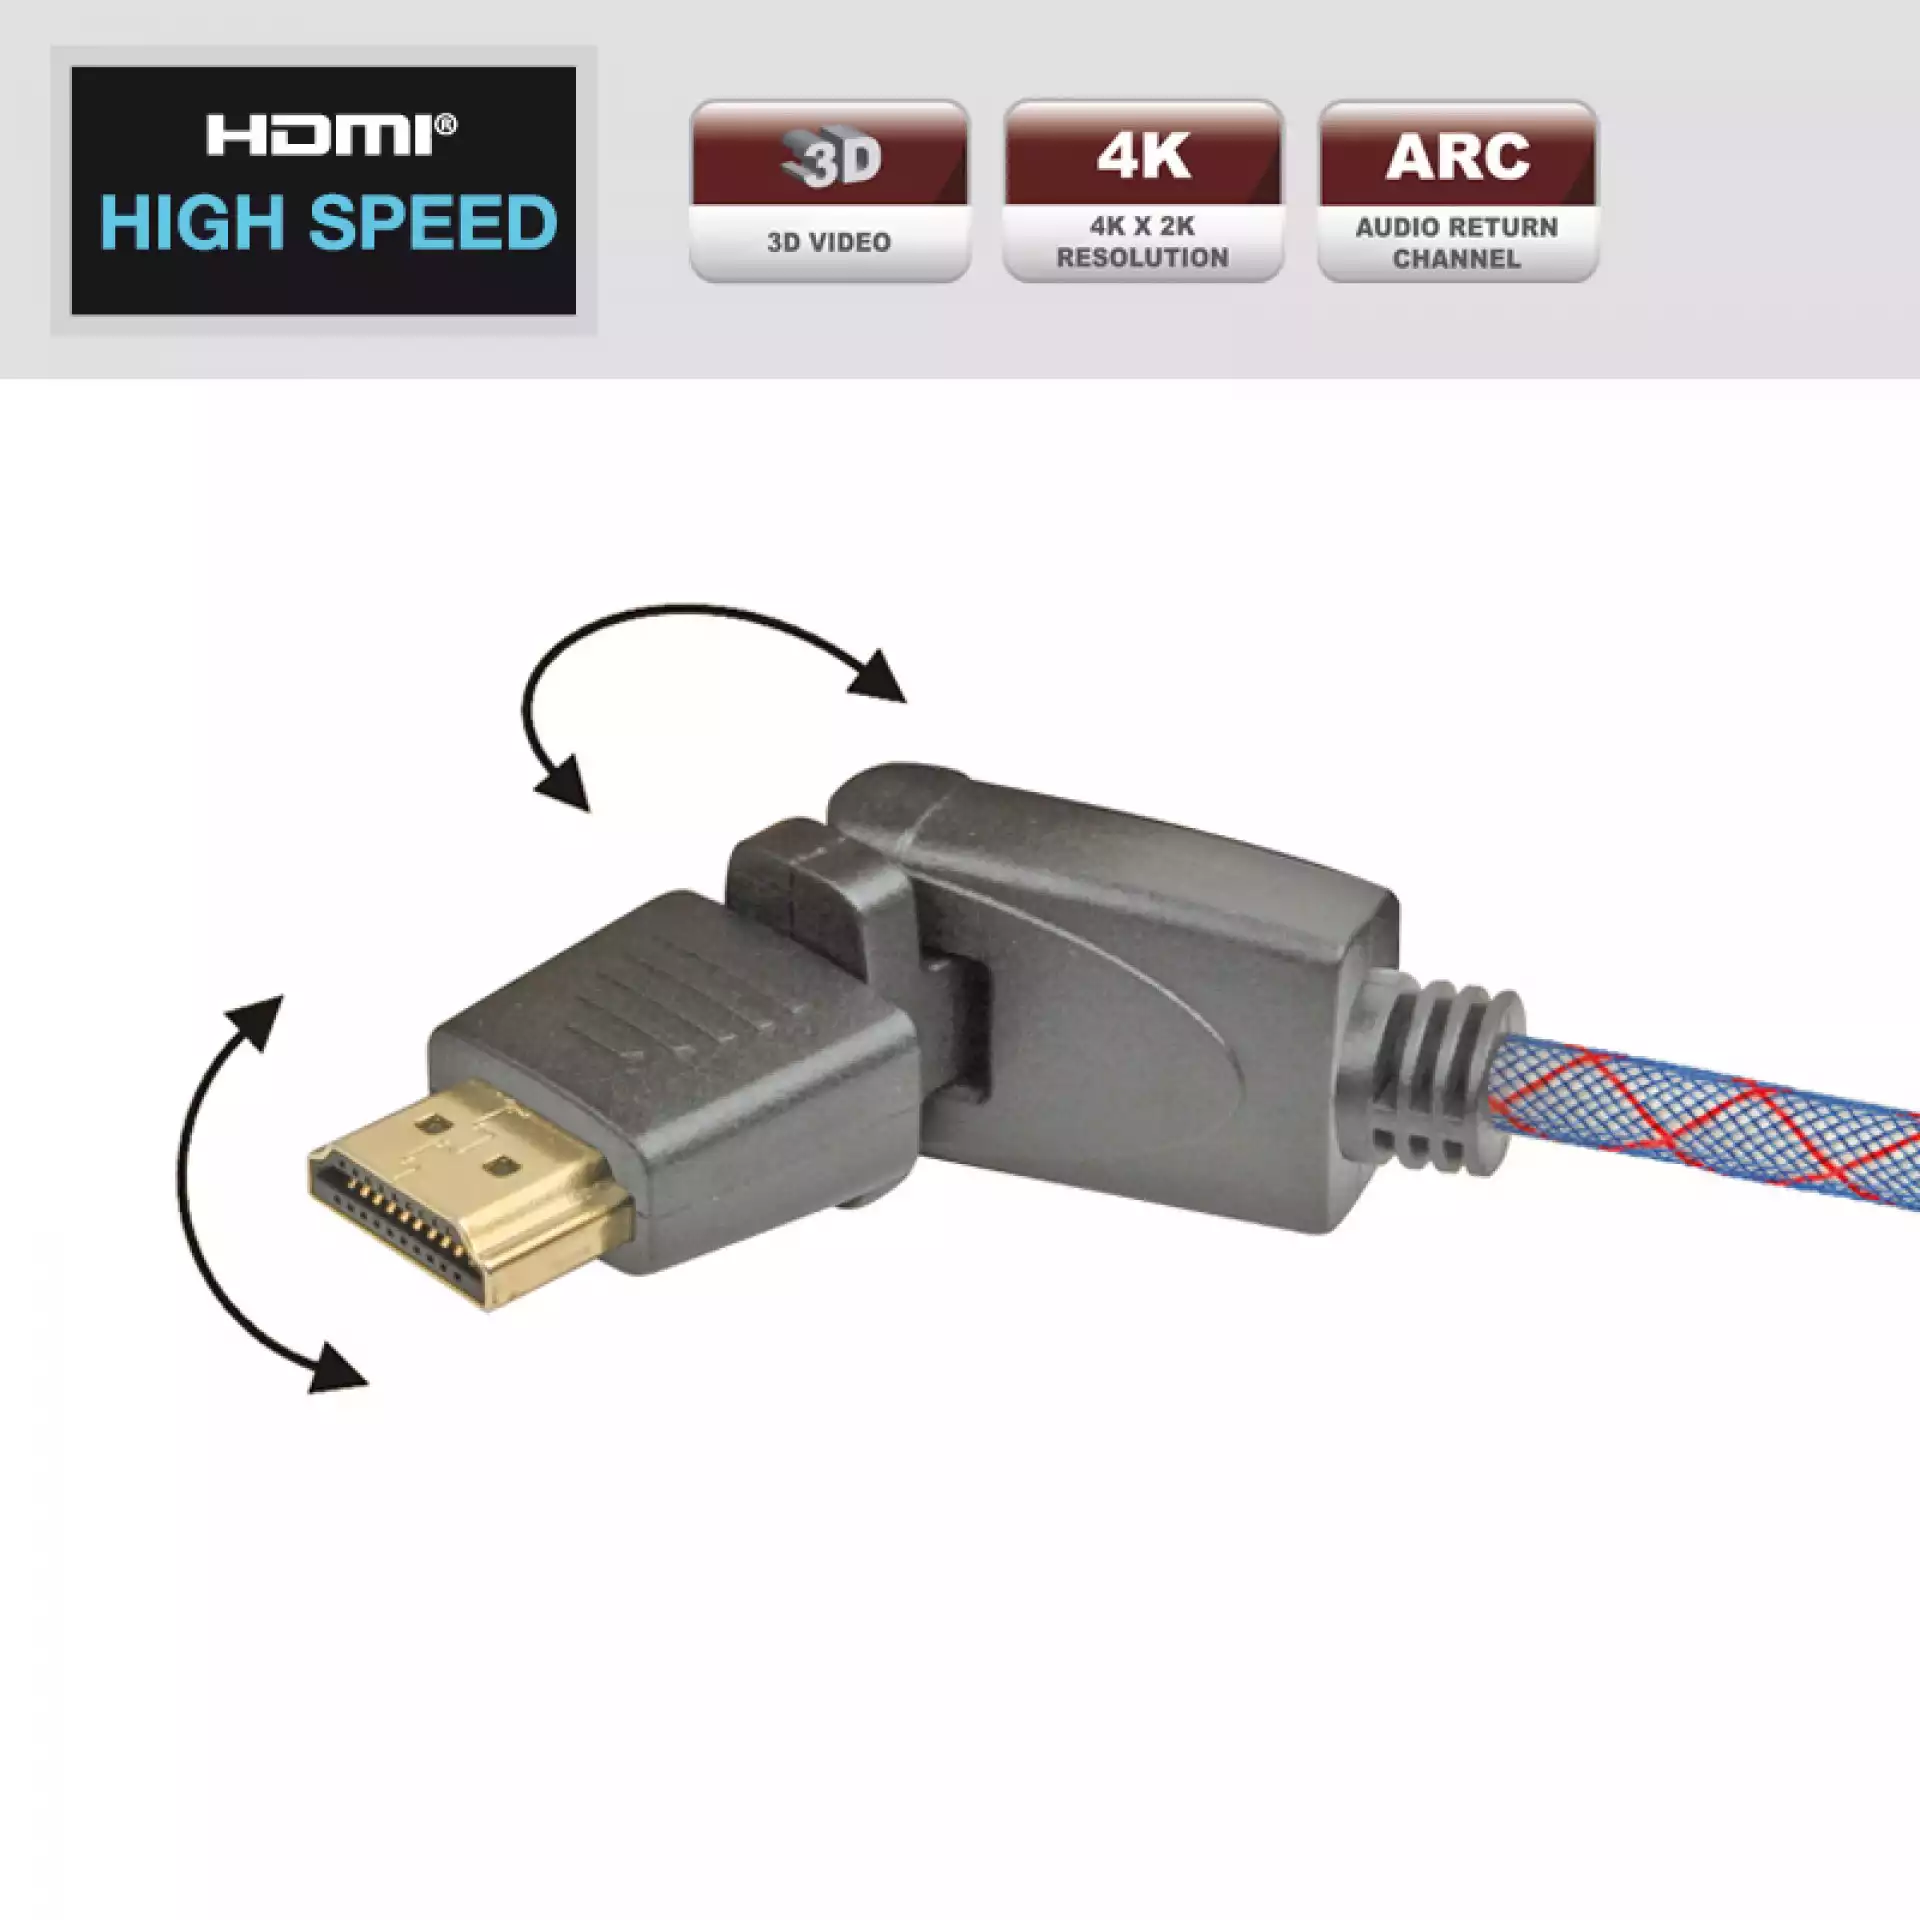 REAL CABLE HD E 360 1.5m